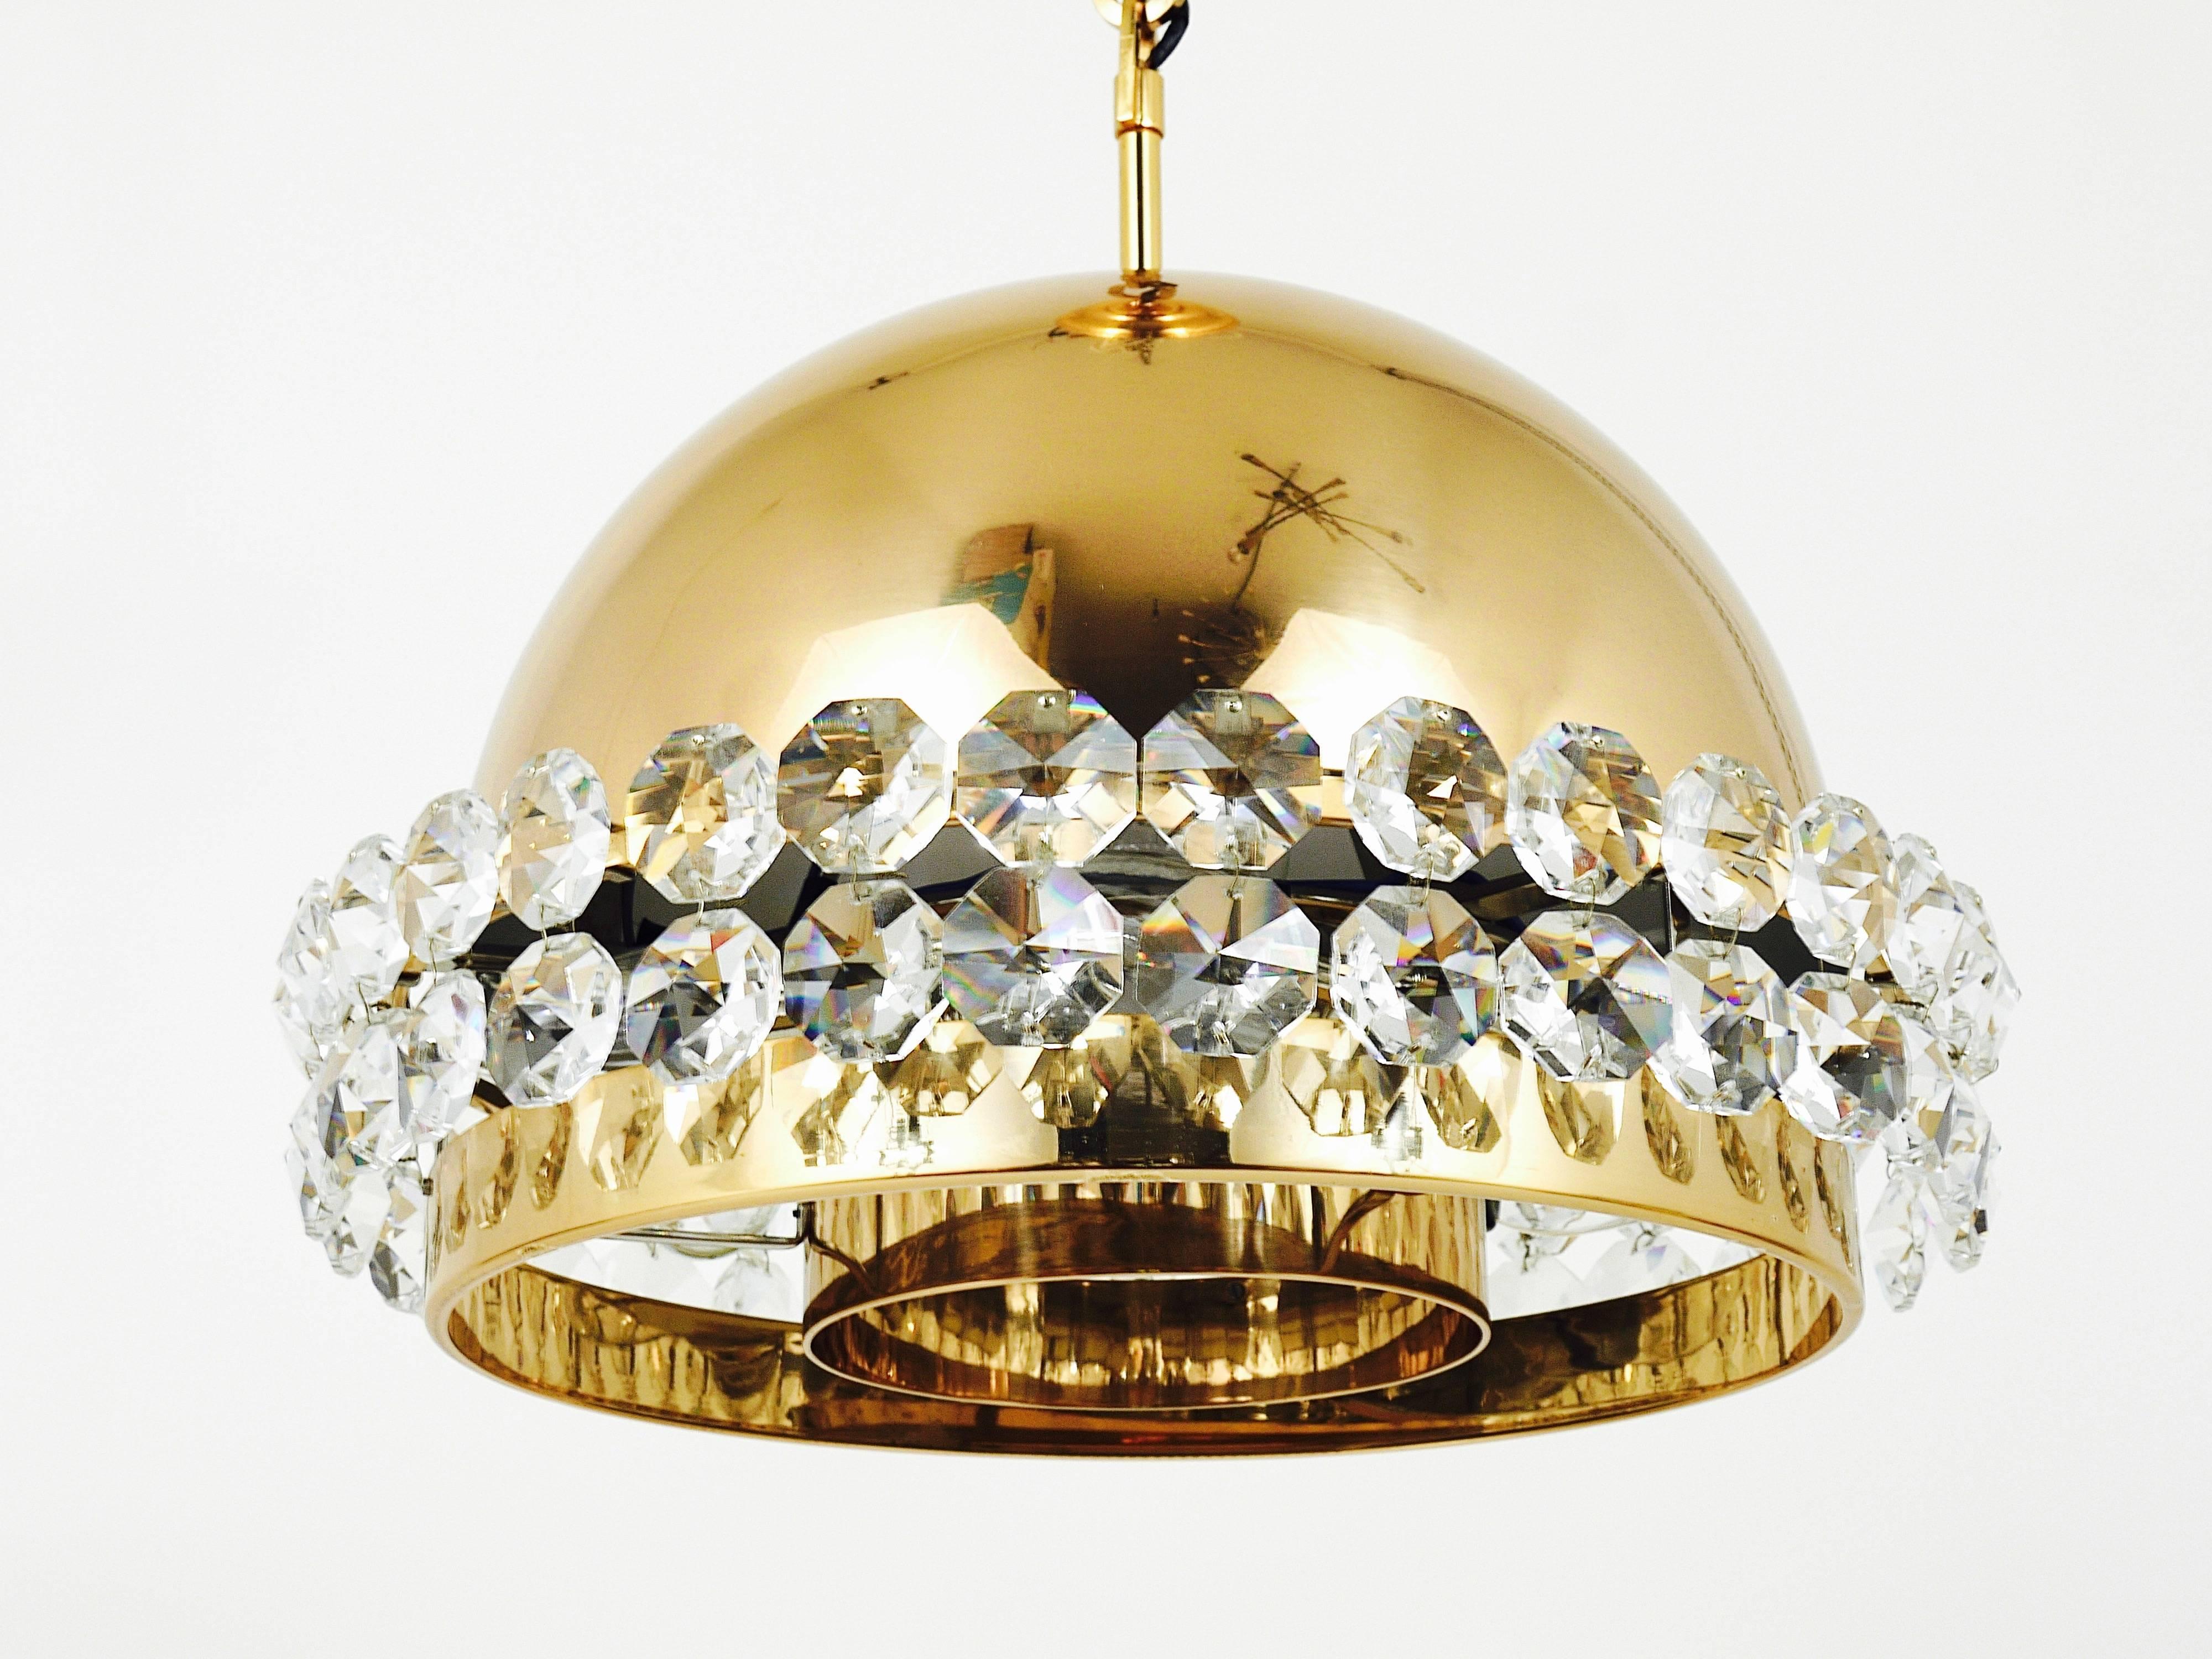 A beautiful Mid-Century gilt brass globe chandelier with big, octagonal diamond-shaped faceted crystals. Executed in the 1970s by Bakalowits & Sohne, Austria. The chandelier has seven light sources. In very good condition. A handmade and exclusive